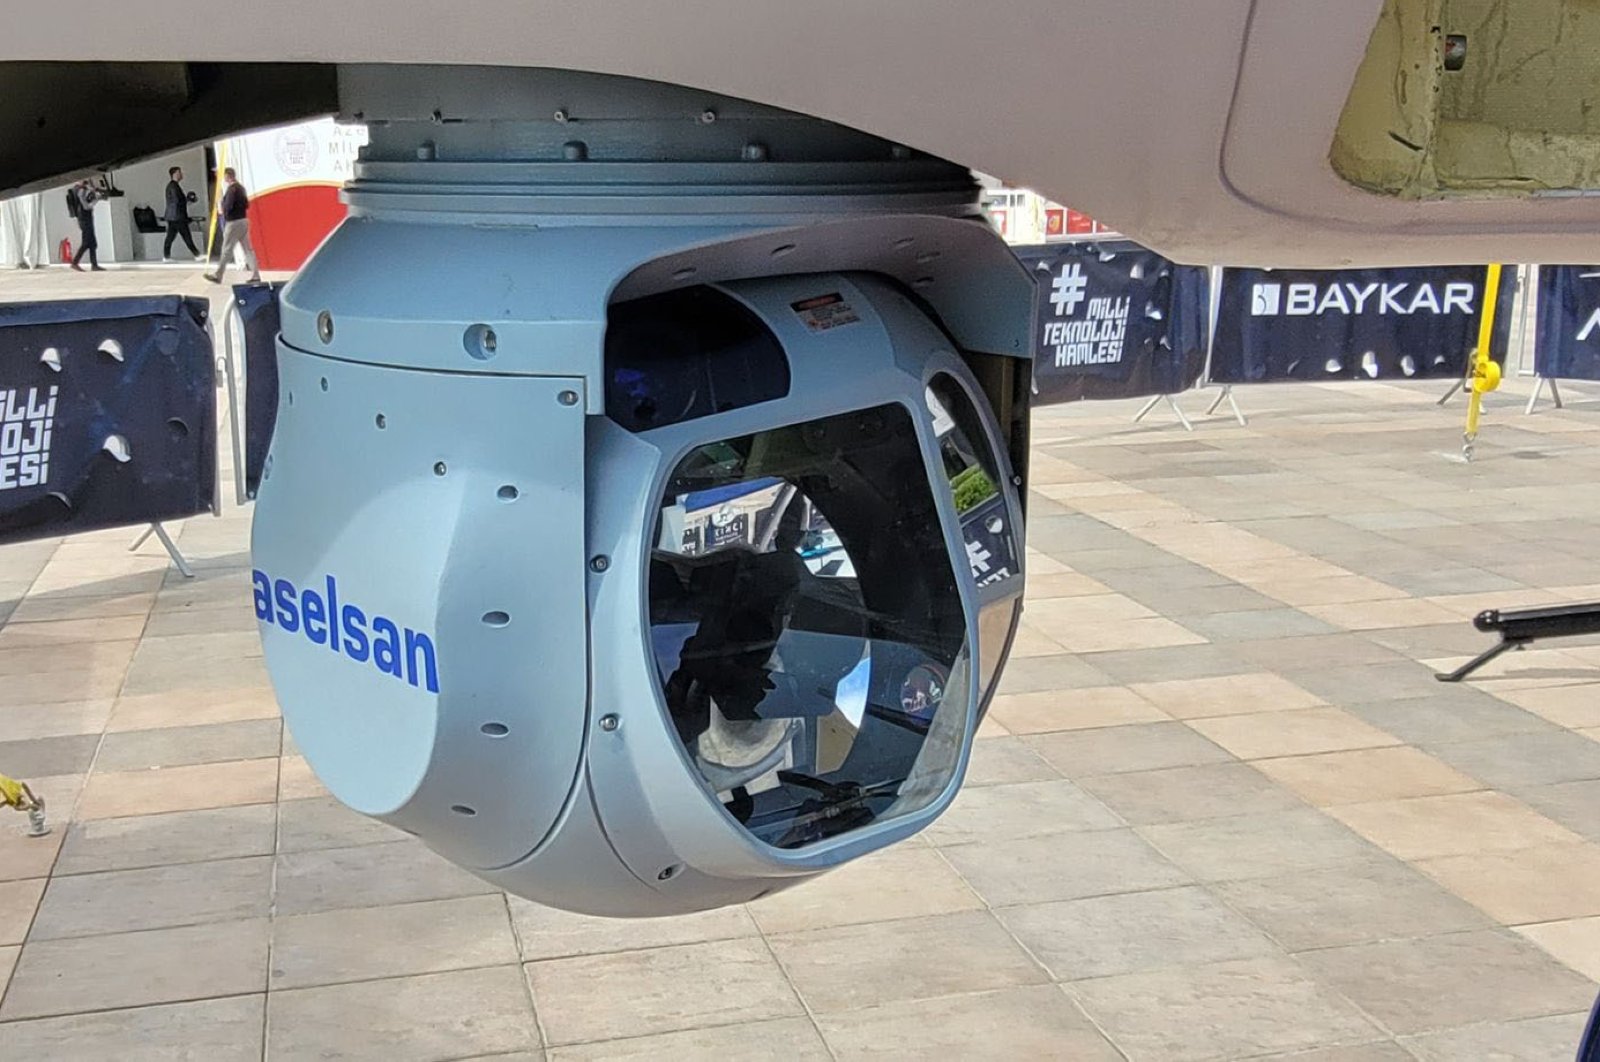 Aselsan&#039;s electro-optical reconnaissance, surveillance and targeting system is integrated into a drone in this udated photo. (DHA Photo)